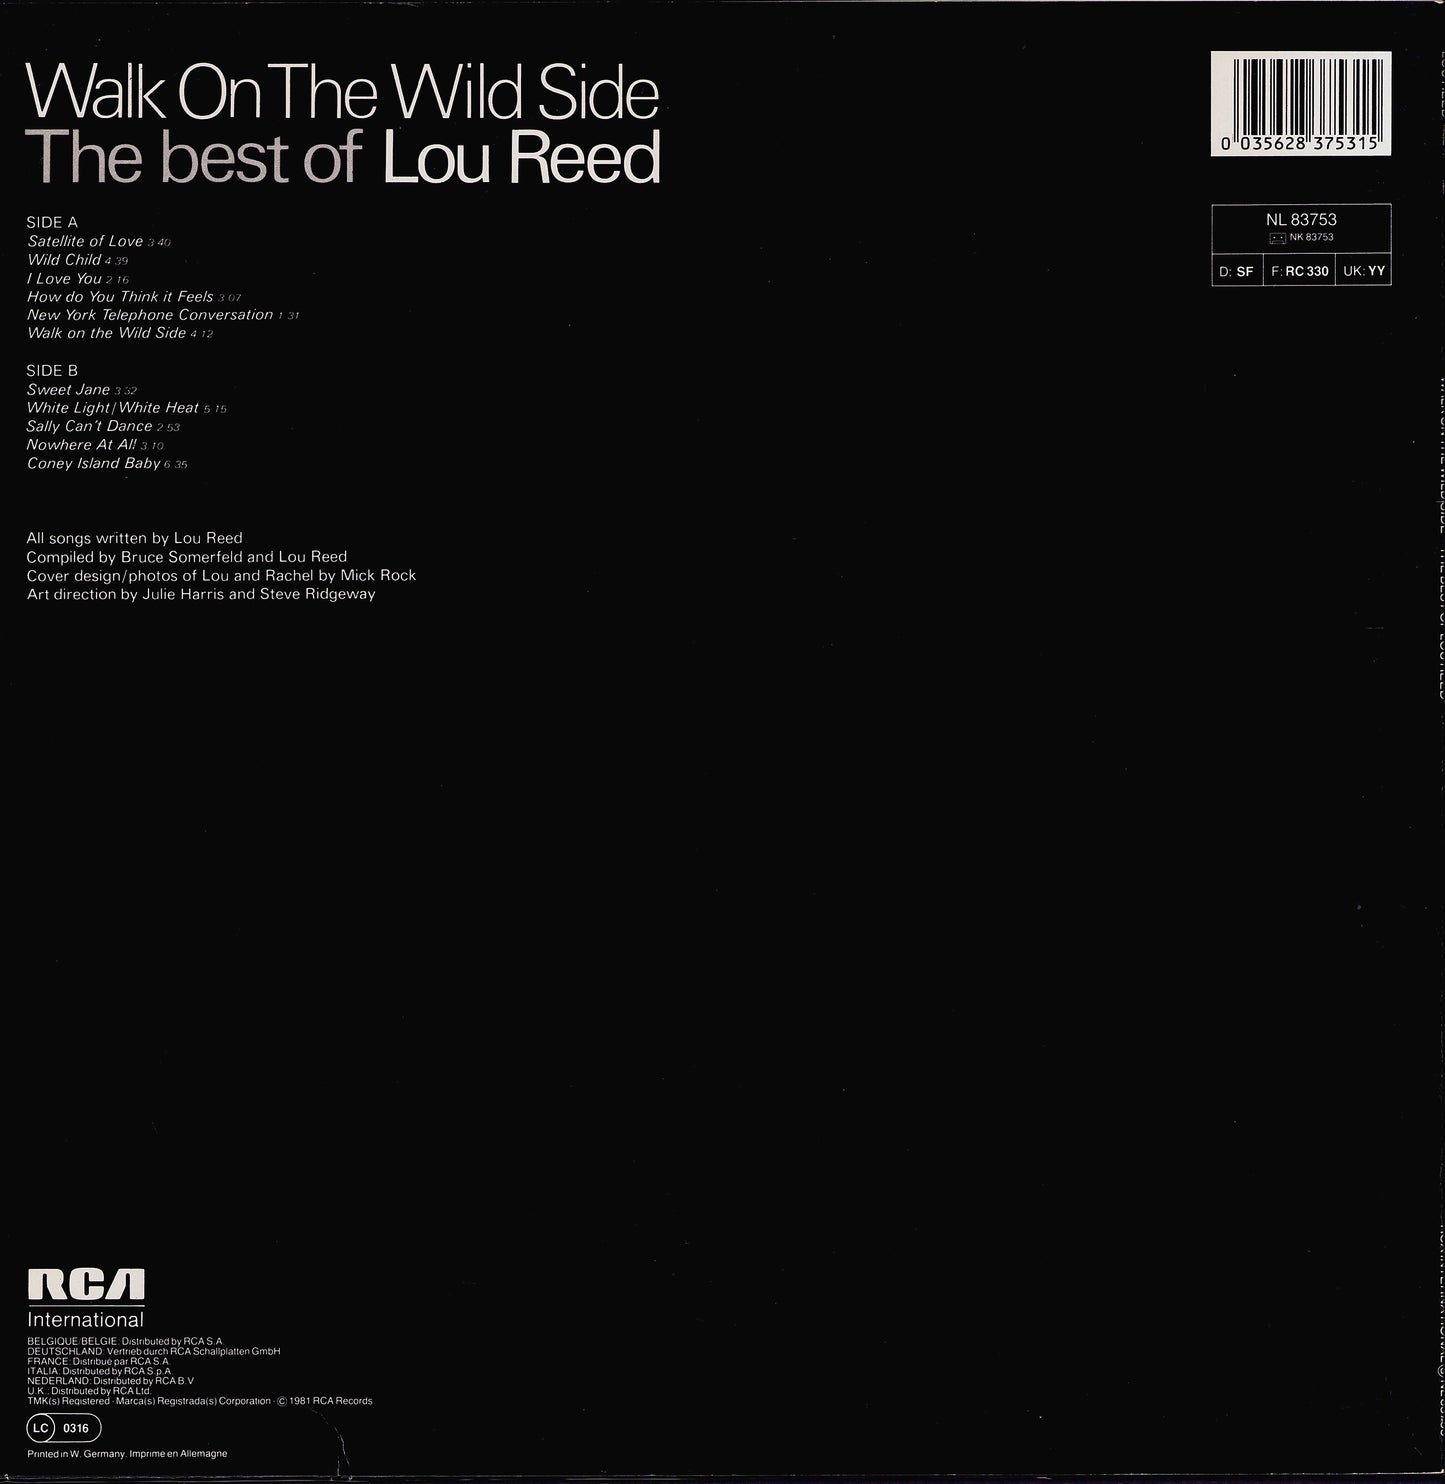 Lou Reed ‎- Walk On The Wild Side - The Best Of Lou Reed Vinyl LP